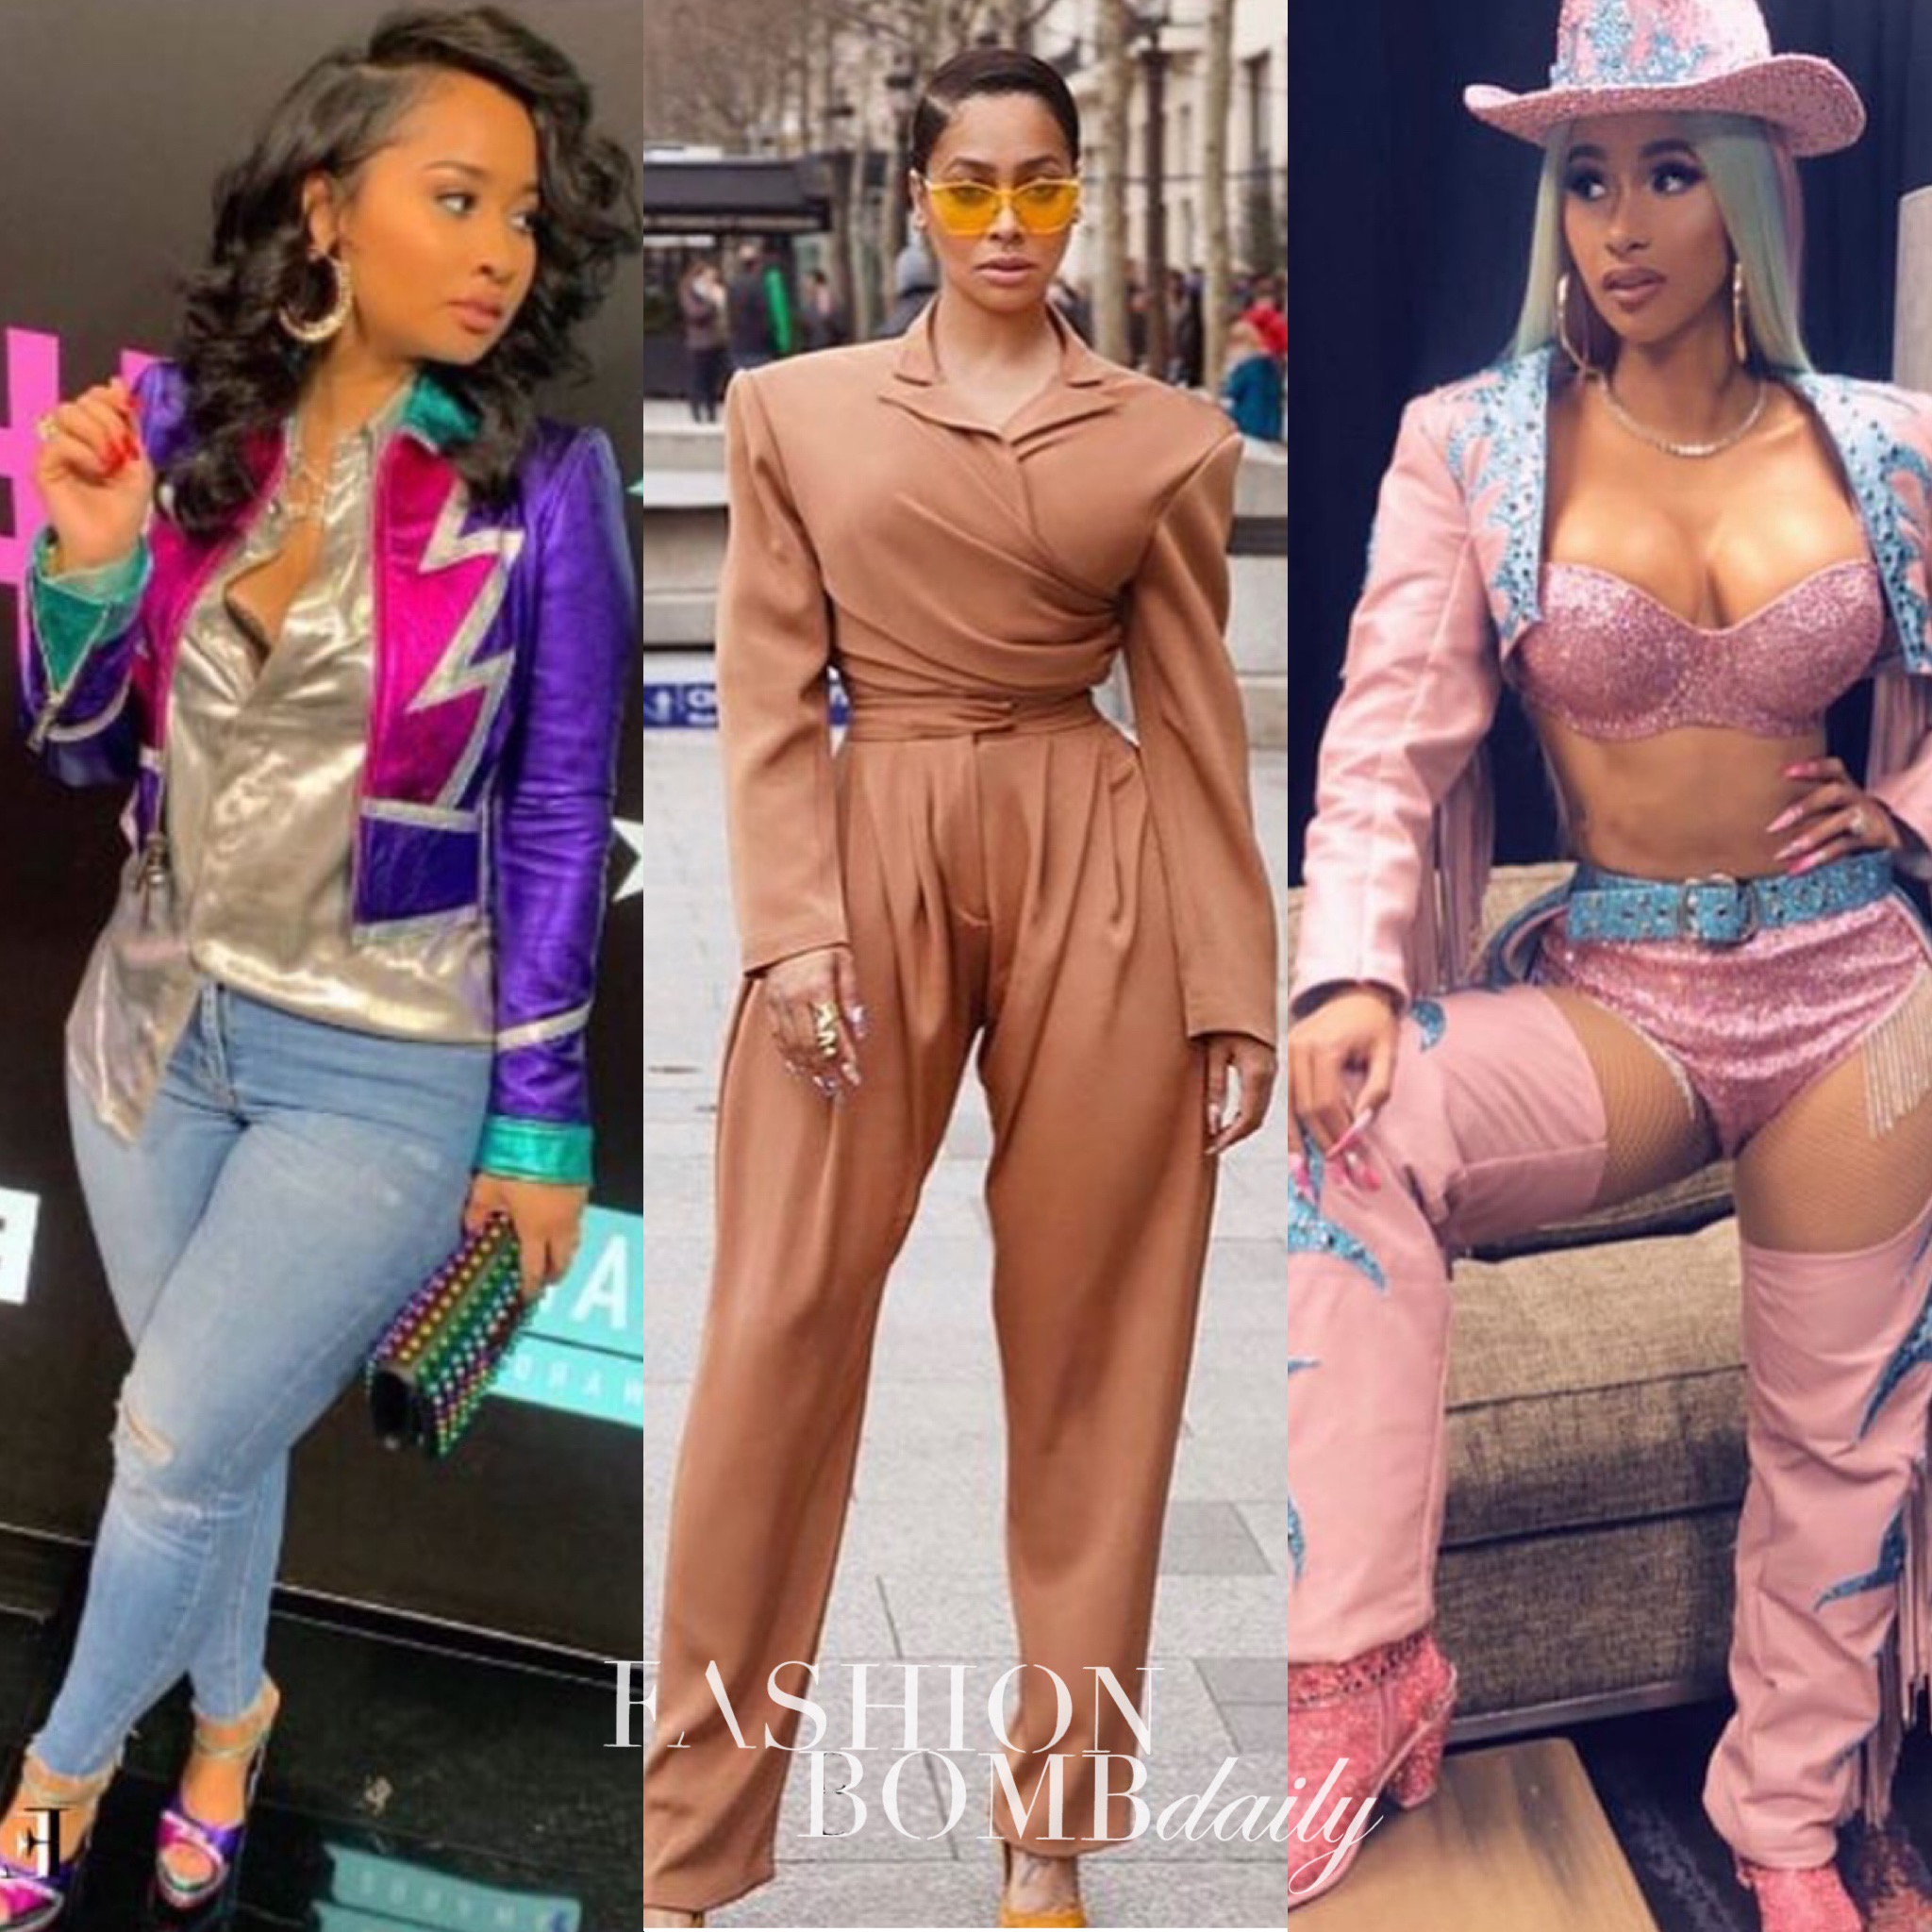 Top_6_Looks_of_the_Day_3:3:19_Cardi_B_in_Bryan_Hearns_LaLa_Anthony_in_Harry_Halim_Tammy_Rivera_in_Dsquared2_and_more